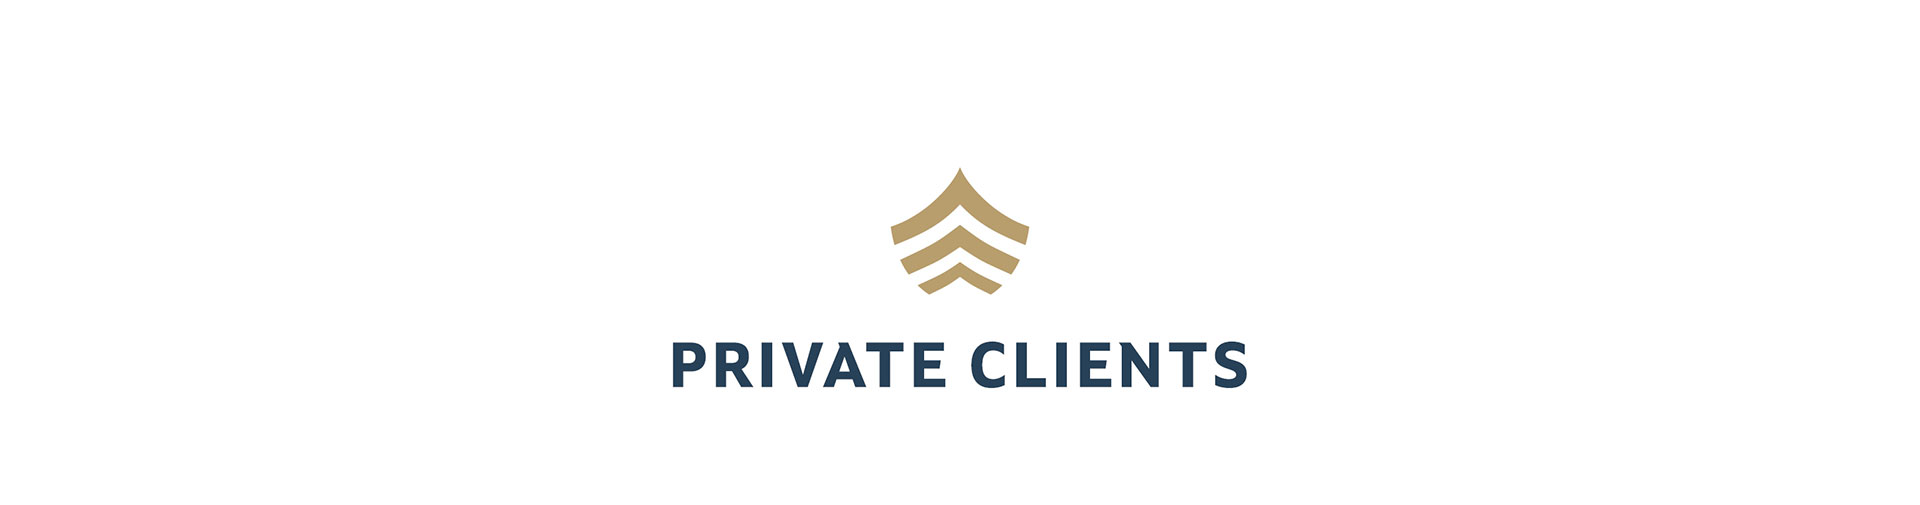 Private Clients Header Logo